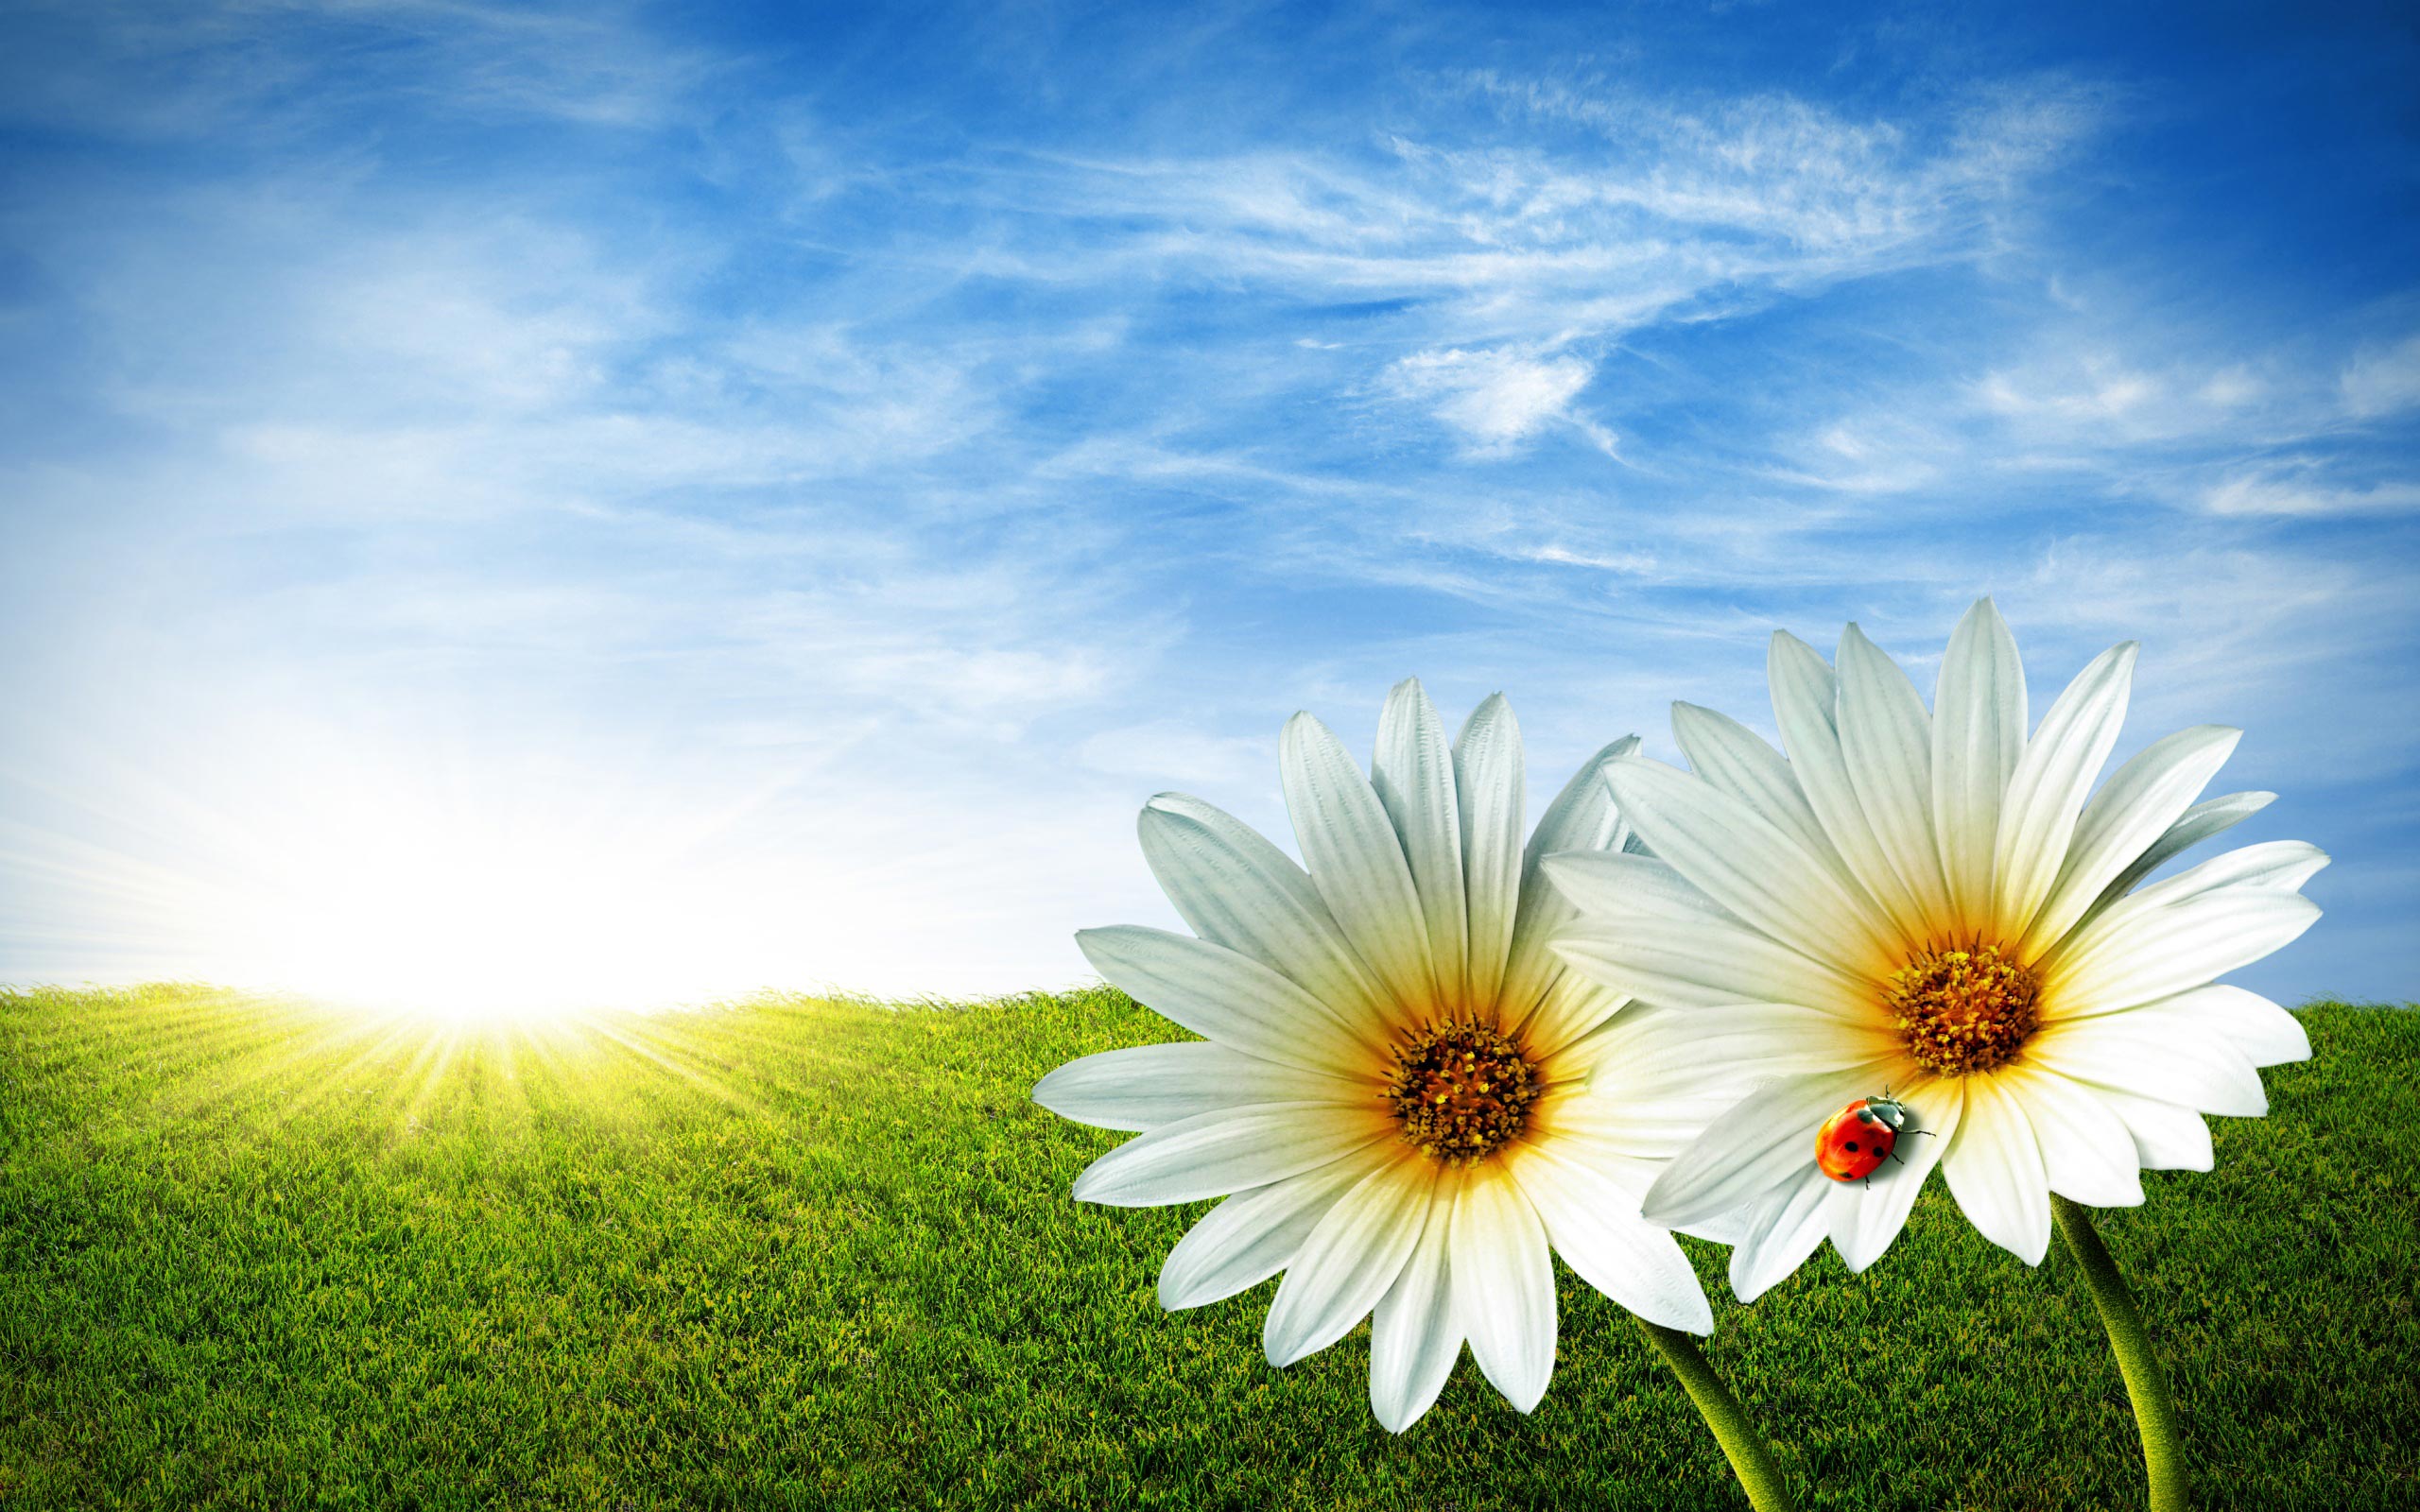  spring wallpapers category of hd wallpapers spring screensavers 2560x1600